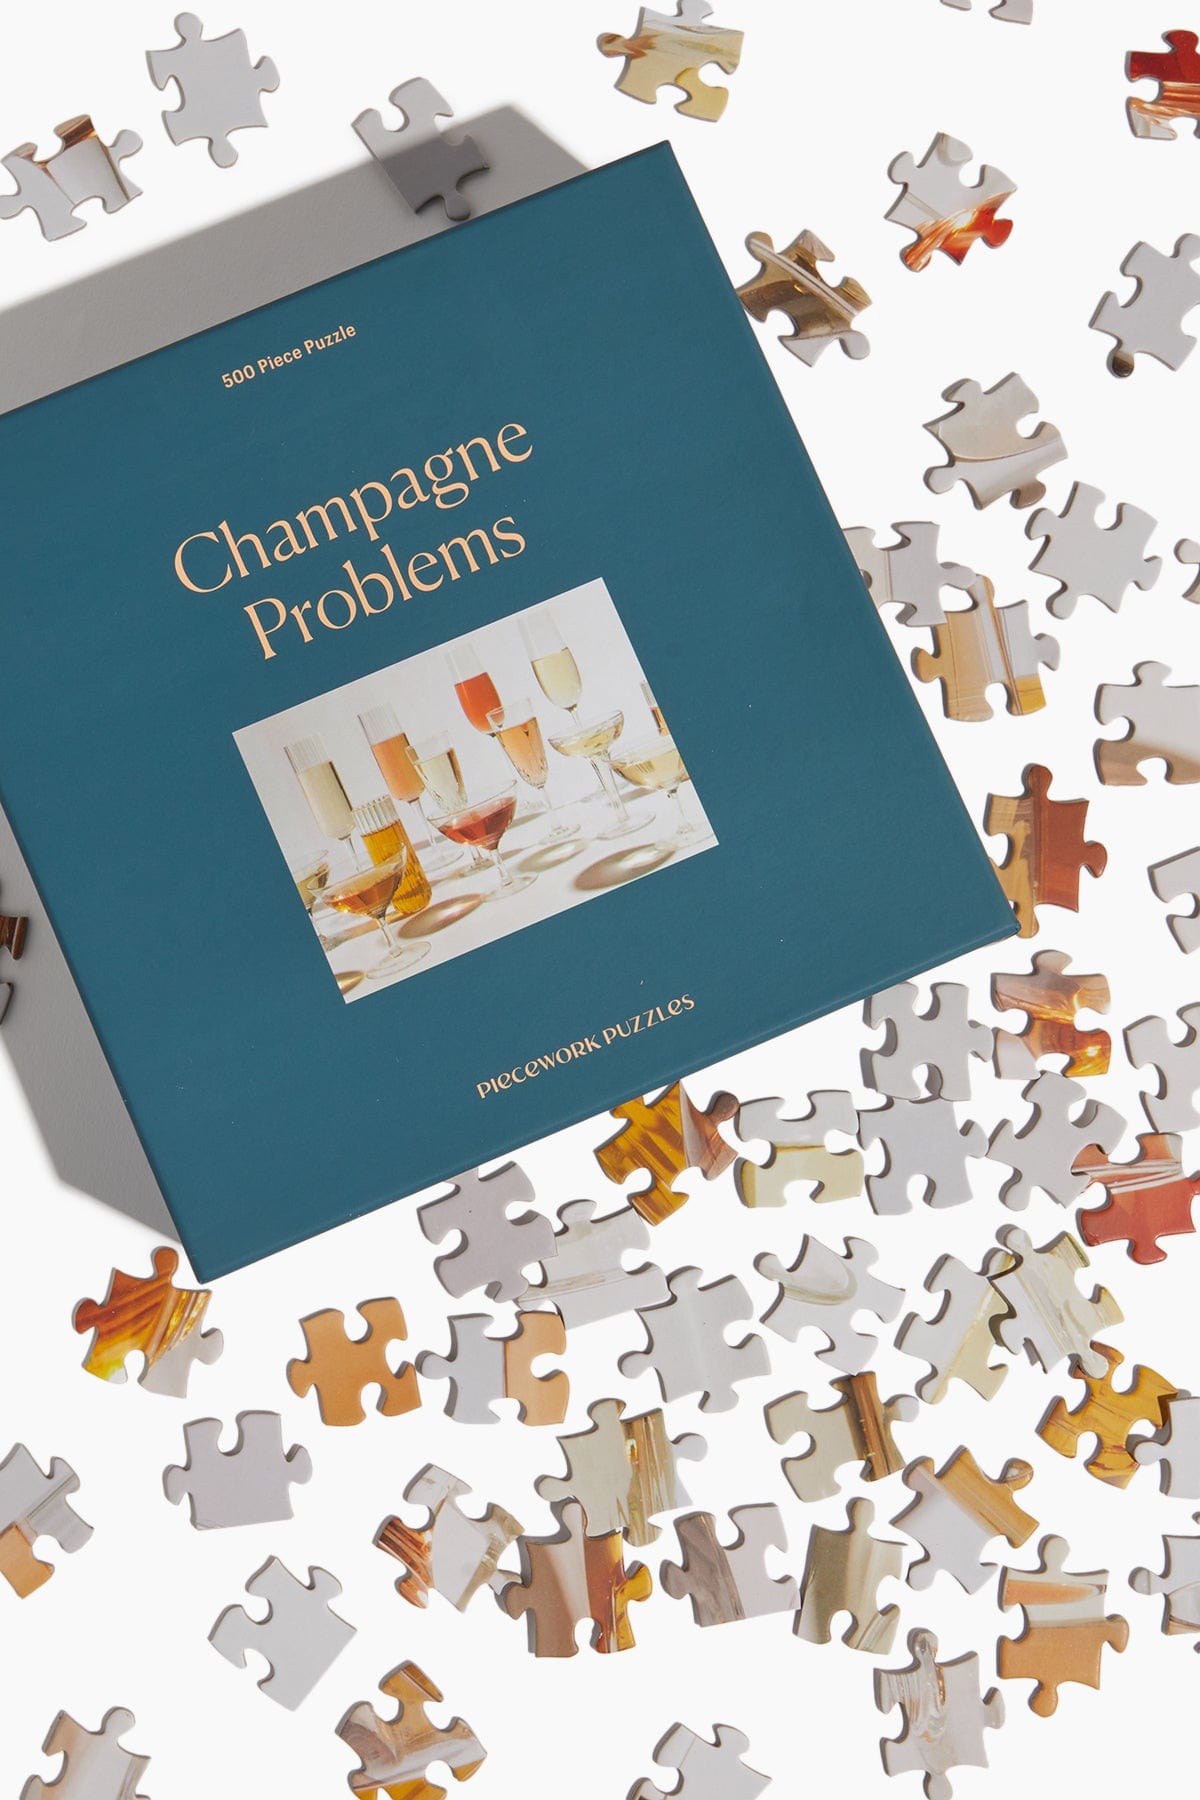 Piecework Puzzles Puzzles Champagne Problems Puzzle Piecework Puzzles Champagne Problems Puzzle